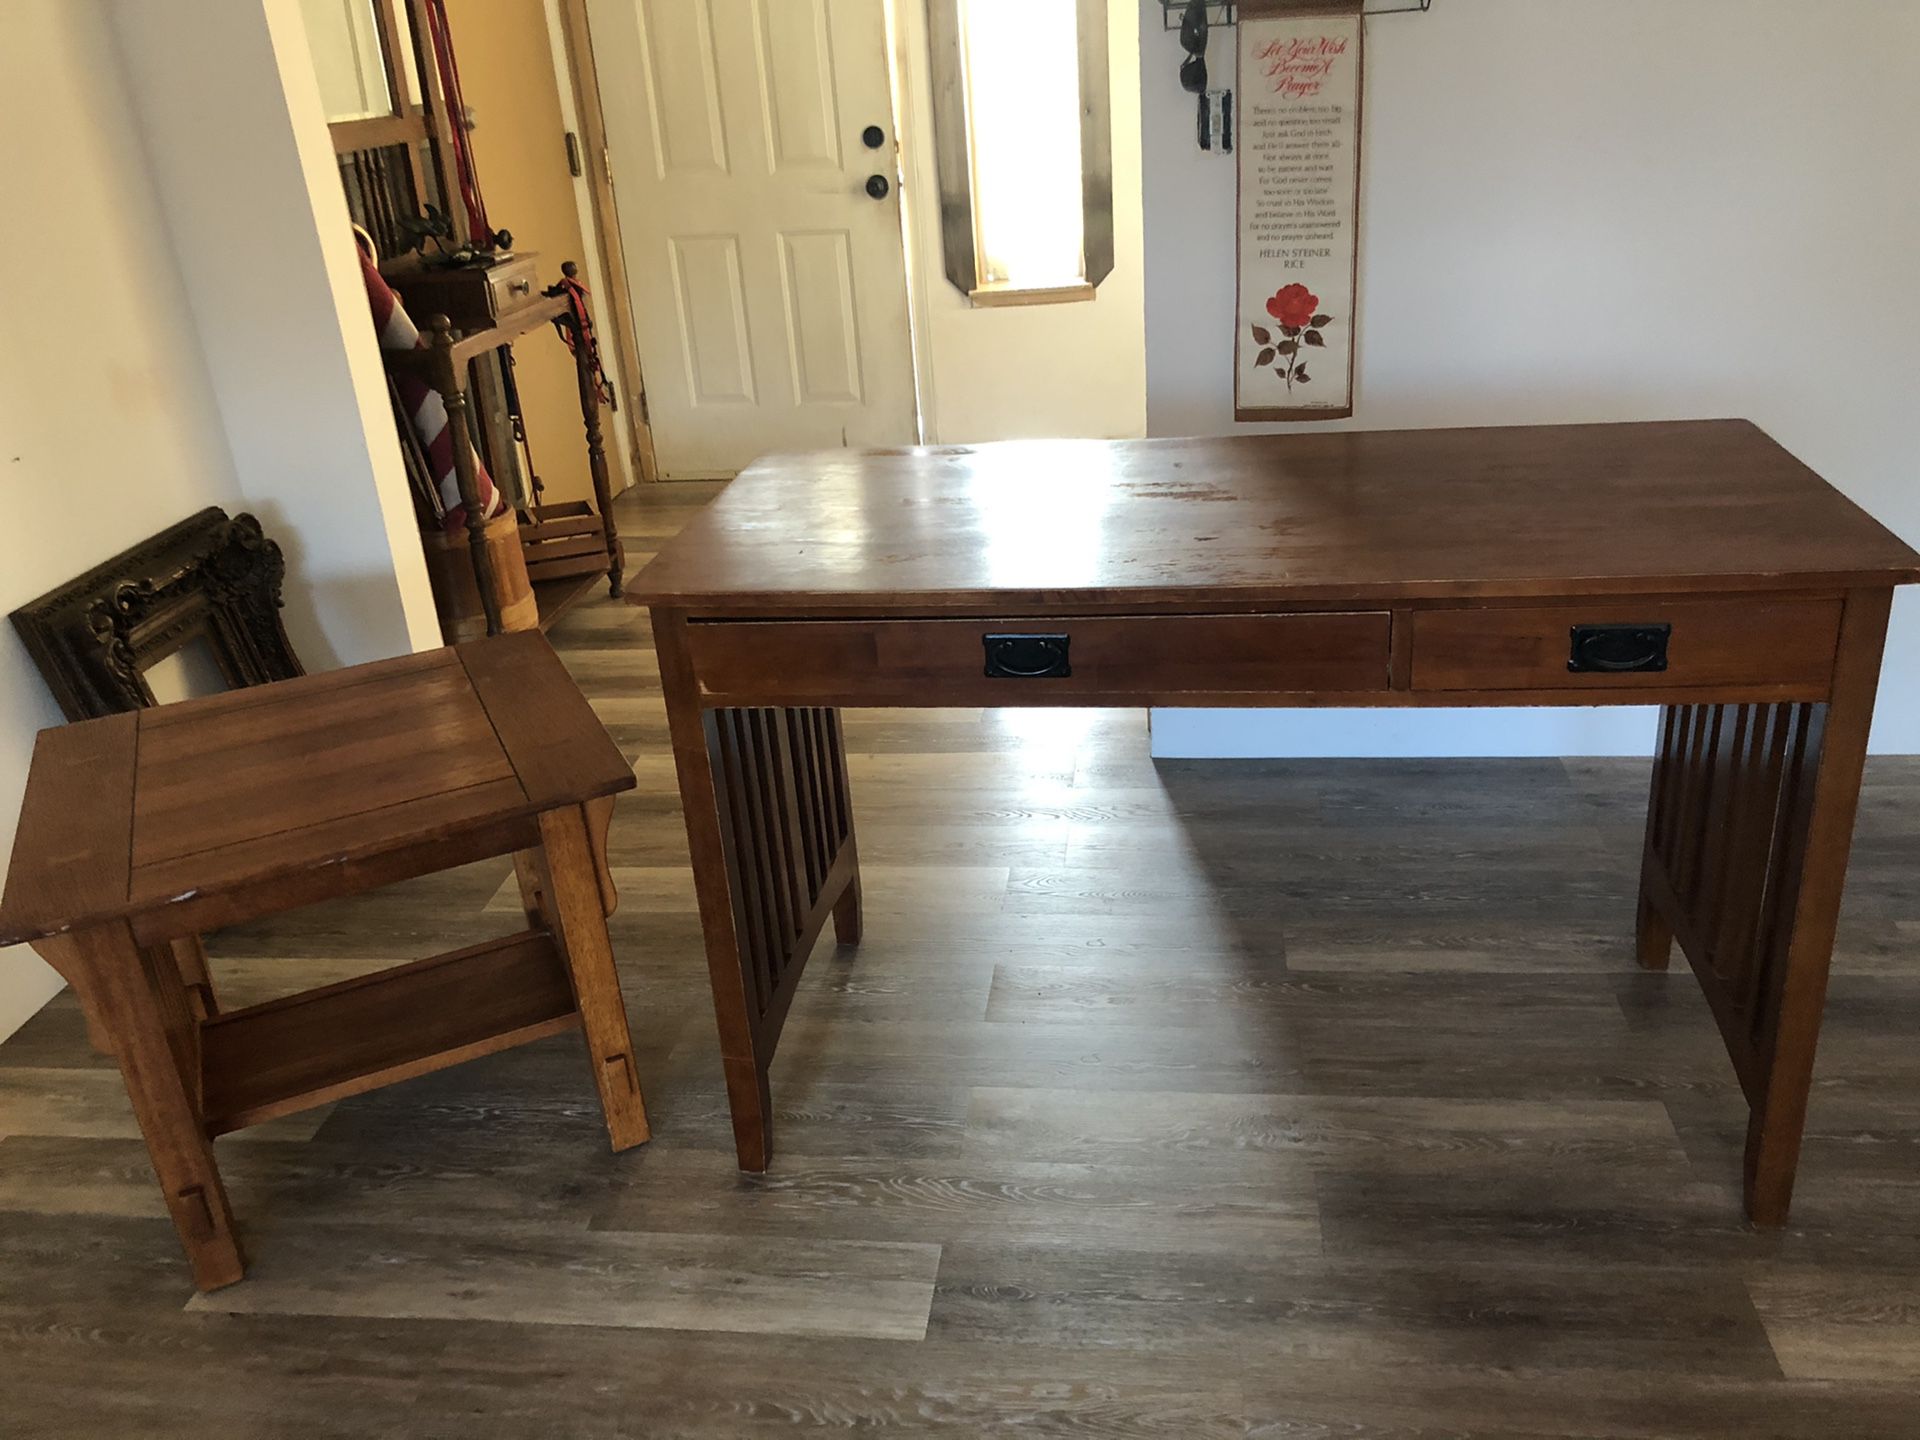 Sofa table/desk and end table